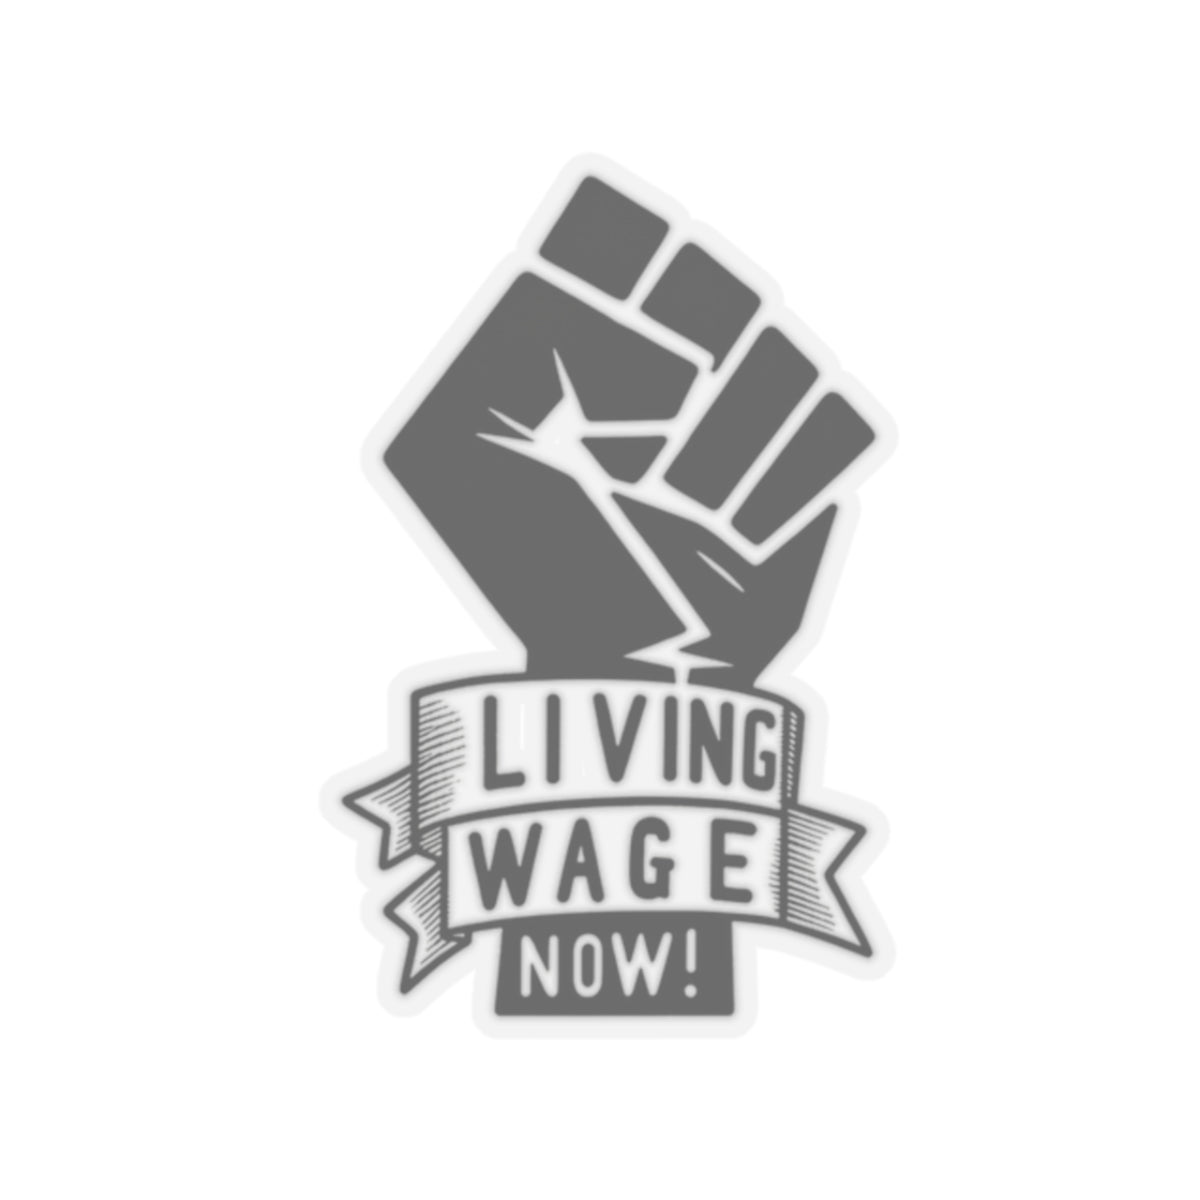 Living Wage Now! v2 Stickers